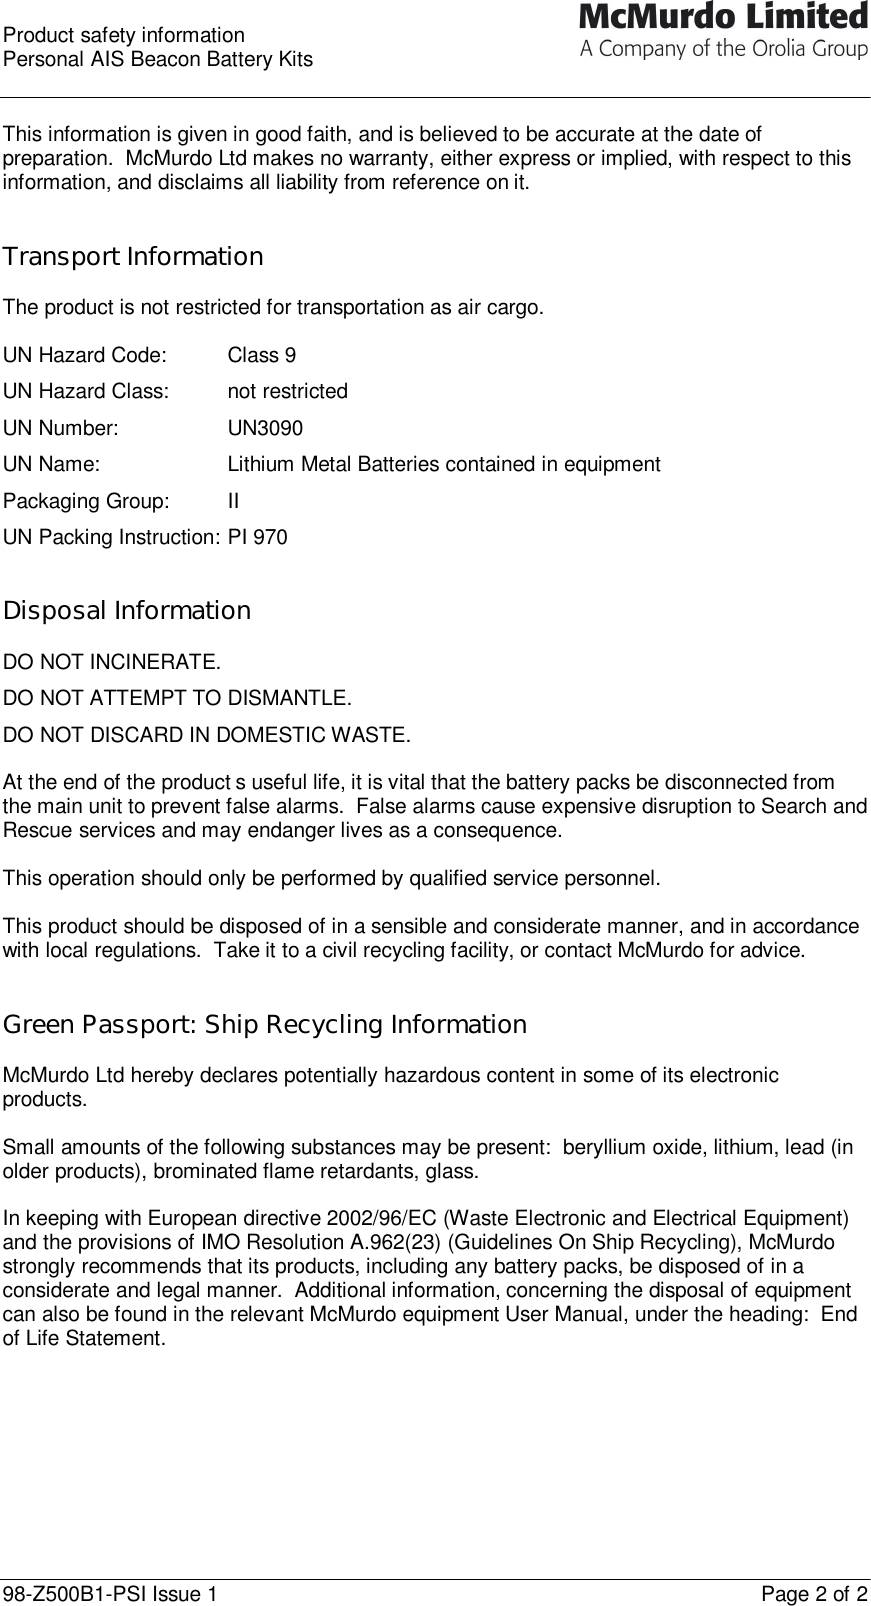  Product safety information Personal AIS Beacon Battery Kits  98-Z500B1-PSI Issue 1    Page 2 of 2  This information is given in good faith, and is believed to be accurate at the date of preparation.  McMurdo Ltd makes no warranty, either express or implied, with respect to this information, and disclaims all liability from reference on it.   Transport Information  The product is not restricted for transportation as air cargo.  UN Hazard Code:   Class 9 UN Hazard Class: not restricted UN Number:    UN3090 UN Name:    Lithium Metal Batteries contained in equipment Packaging Group: II UN Packing Instruction: PI 970   Disposal Information  DO NOT INCINERATE. DO NOT ATTEMPT TO DISMANTLE. DO NOT DISCARD IN DOMESTIC WASTE.  At the end of the product’s useful life, it is vital that the battery packs be disconnected from the main unit to prevent false alarms.  False alarms cause expensive disruption to Search and Rescue services and may endanger lives as a consequence.  This operation should only be performed by qualified service personnel.   This product should be disposed of in a sensible and considerate manner, and in accordance with local regulations.  Take it to a civil recycling facility, or contact McMurdo for advice.   Green Passport: Ship Recycling Information  McMurdo Ltd hereby declares potentially hazardous content in some of its electronic products.  Small amounts of the following substances may be present:  beryllium oxide, lithium, lead (in older products), brominated flame retardants, glass.  In keeping with European directive 2002/96/EC (Waste Electronic and Electrical Equipment) and the provisions of IMO Resolution A.962(23) (Guidelines On Ship Recycling), McMurdo strongly recommends that its products, including any battery packs, be disposed of in a considerate and legal manner.  Additional information, concerning the disposal of equipment can also be found in the relevant McMurdo equipment User Manual, under the heading:  End of Life Statement.   